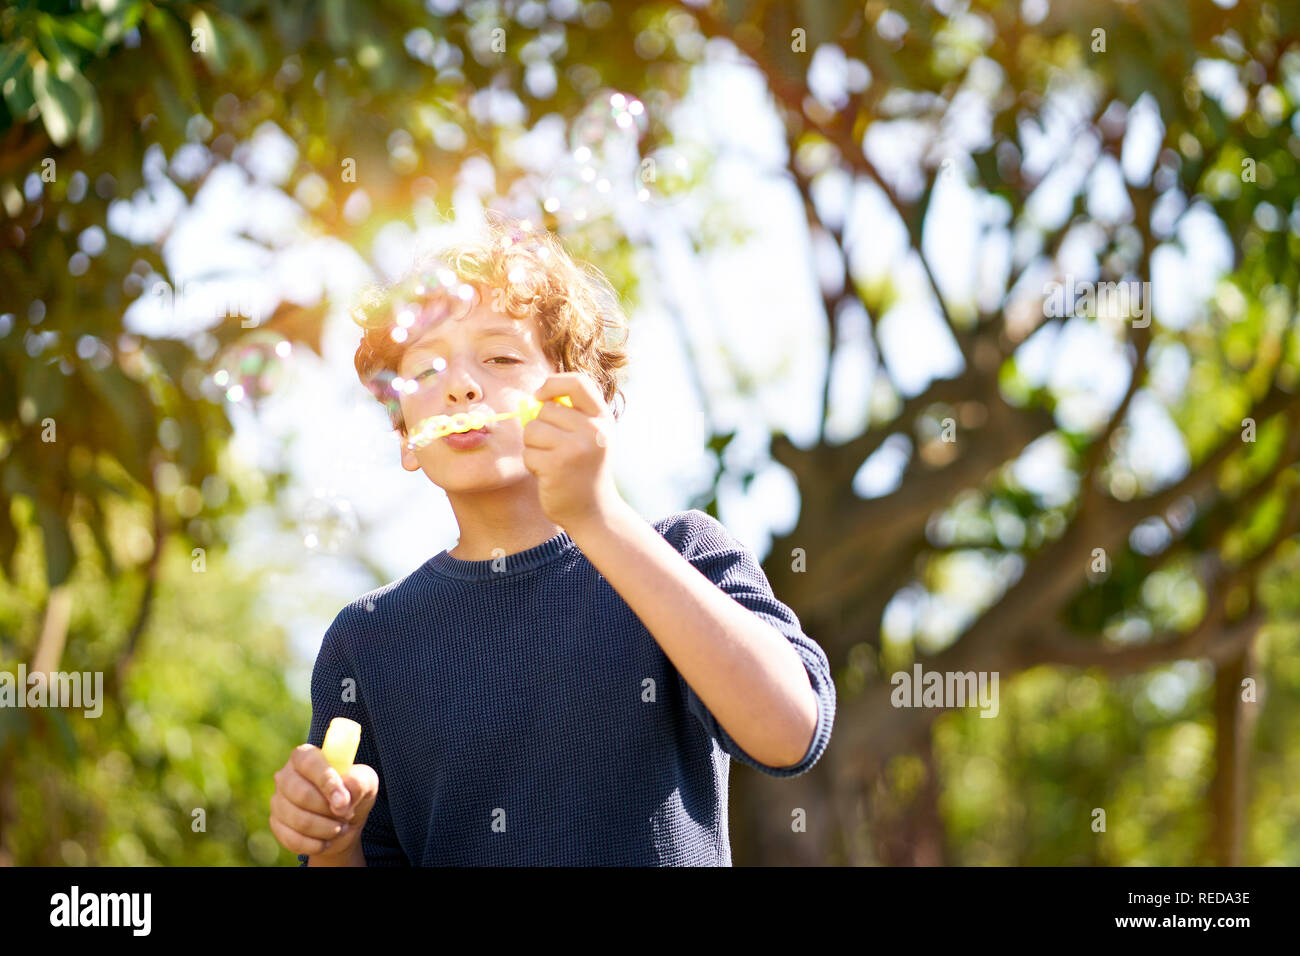 10 year-old italian boy blowing soap bubbles outdoors in park. Stock Photo